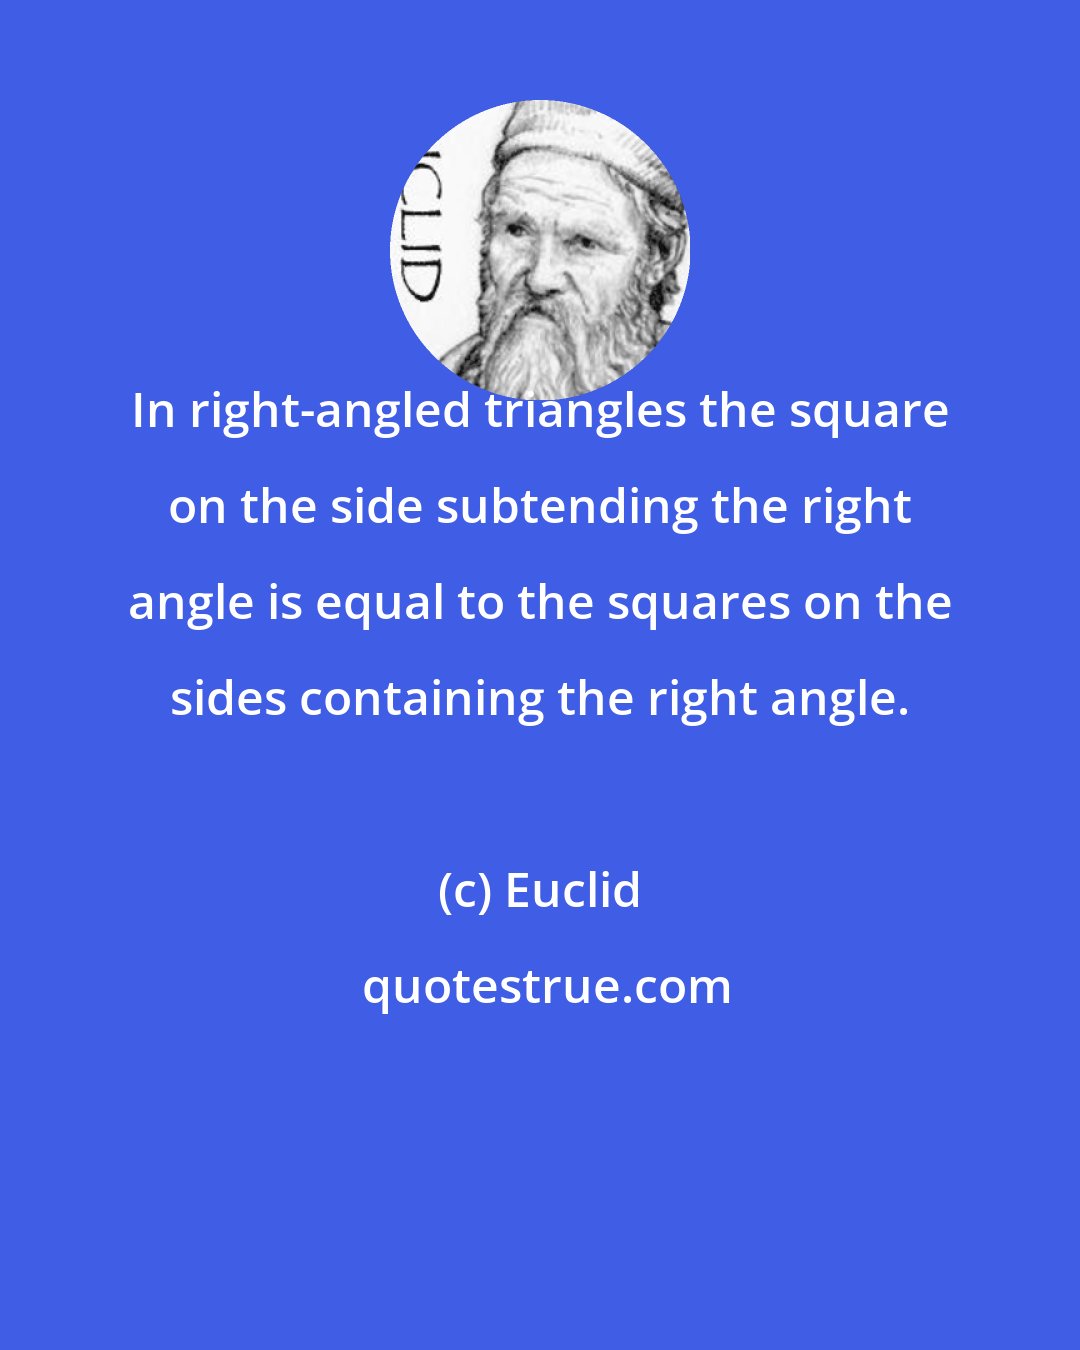 Euclid: In right-angled triangles the square on the side subtending the right angle is equal to the squares on the sides containing the right angle.